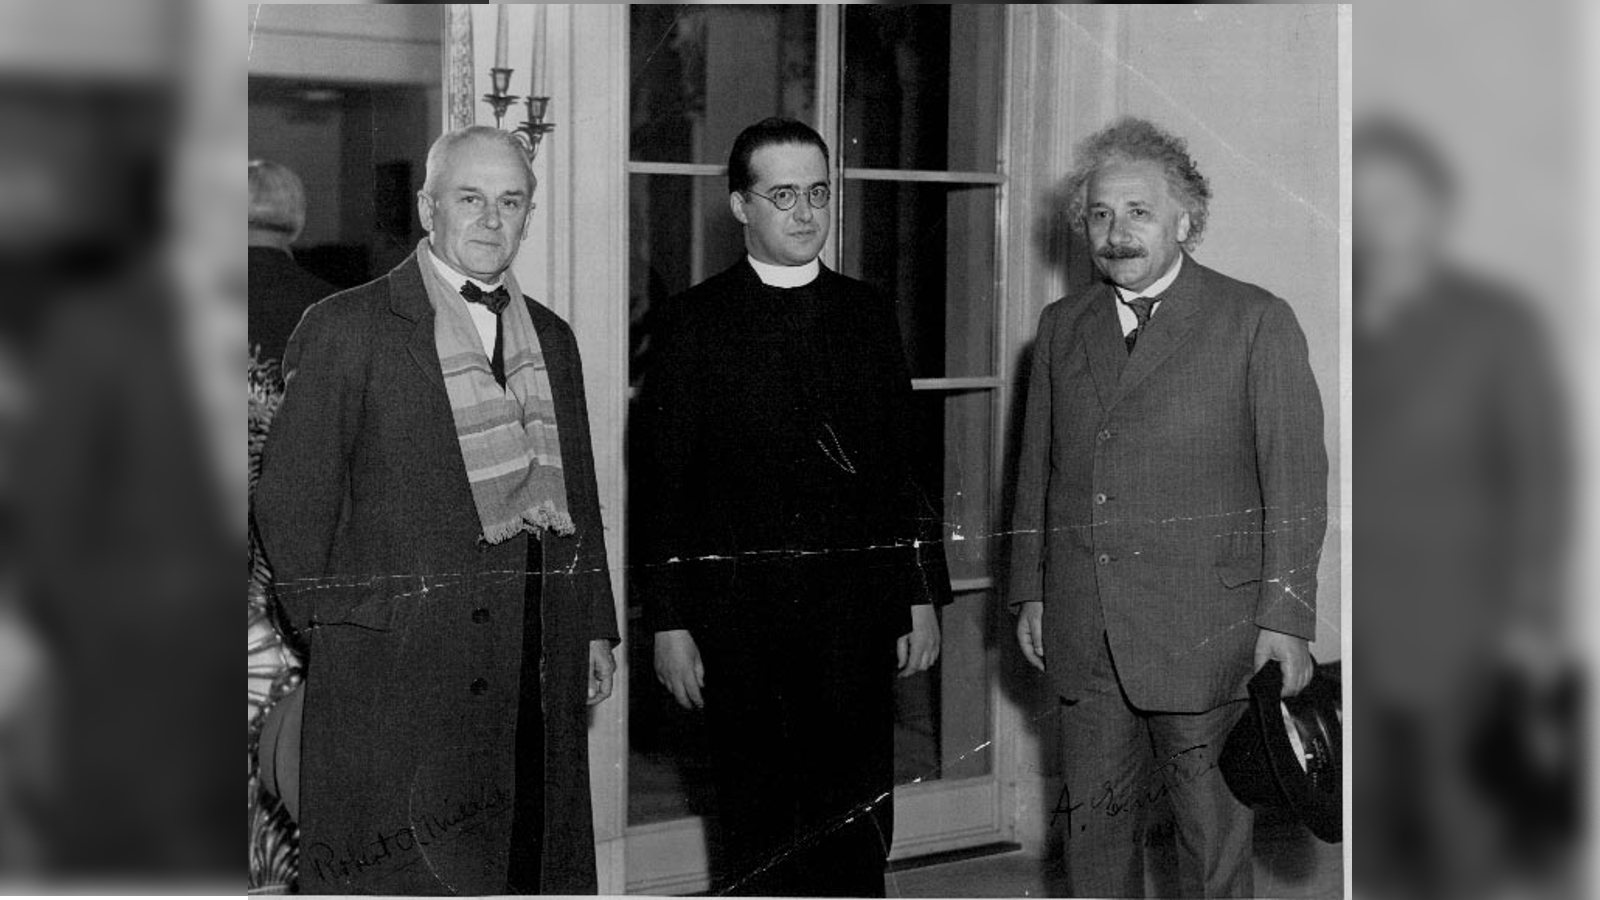 Georges Lemaître (center) photographed with American physicist Robert Millikan (left) and Albert Einstein (right) after Lemaître gave a lecture at the California Institute of Technology in January 1933.